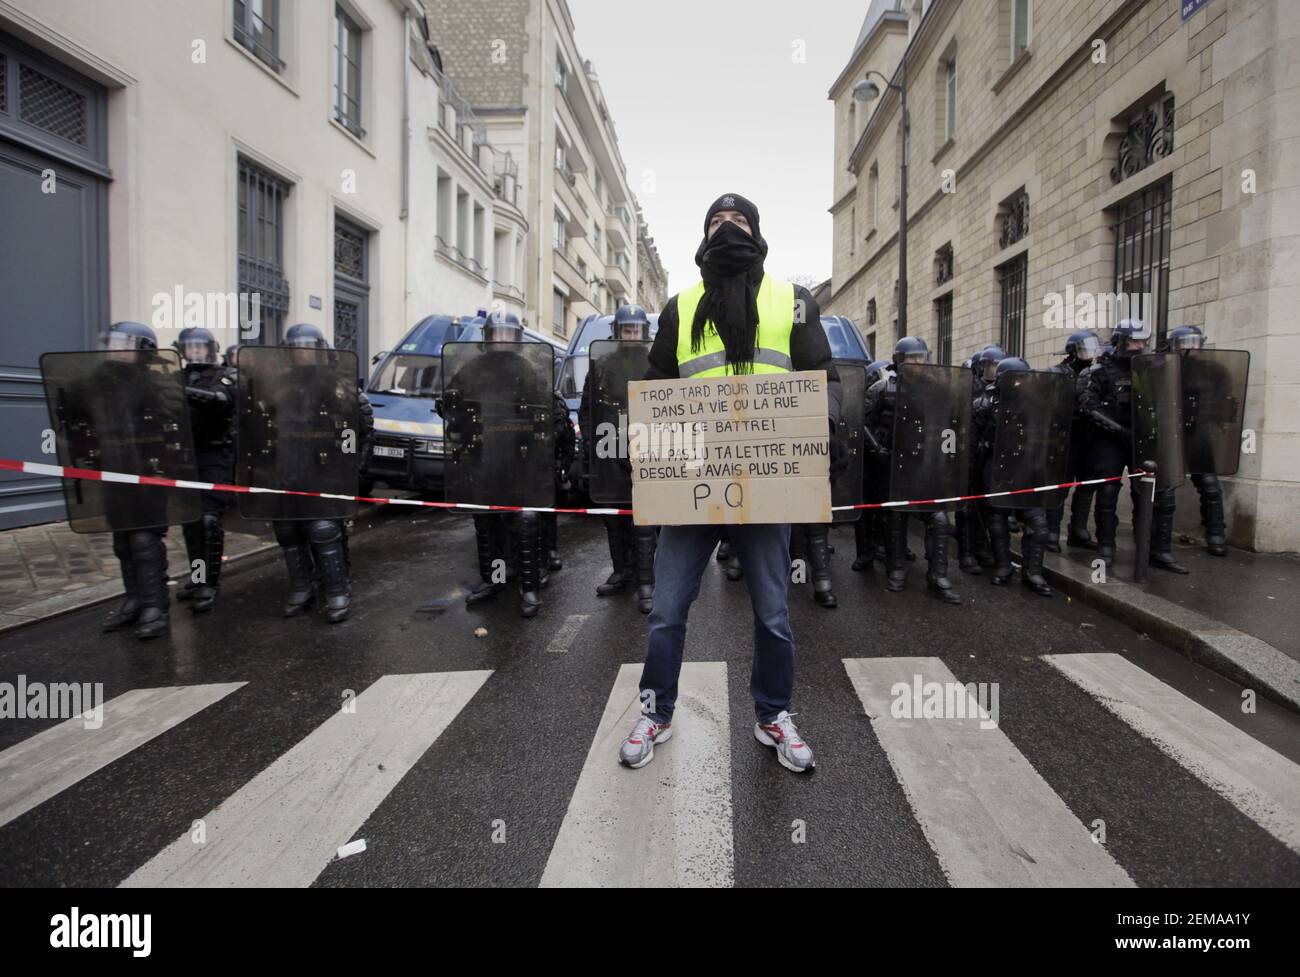 19 January 2019. Paris, France. Gilets Jaunes - Acte X take to the streets of Paris. A lone protester makes his feelings known to a wall of CRS riot police who have sealed a road along the route. An estimated 7,000 people took part in the looping 14 km route from Place des Invalides to protest tax hikes from the Government of Emmanuel Macron imposed on the people. An estimated 80,000 people took part in protests across the country. Regrettably the movement has attracted a violent element of agitators who often face off with riot police at the end of the marches which tends to deflect attentio Stock Photo